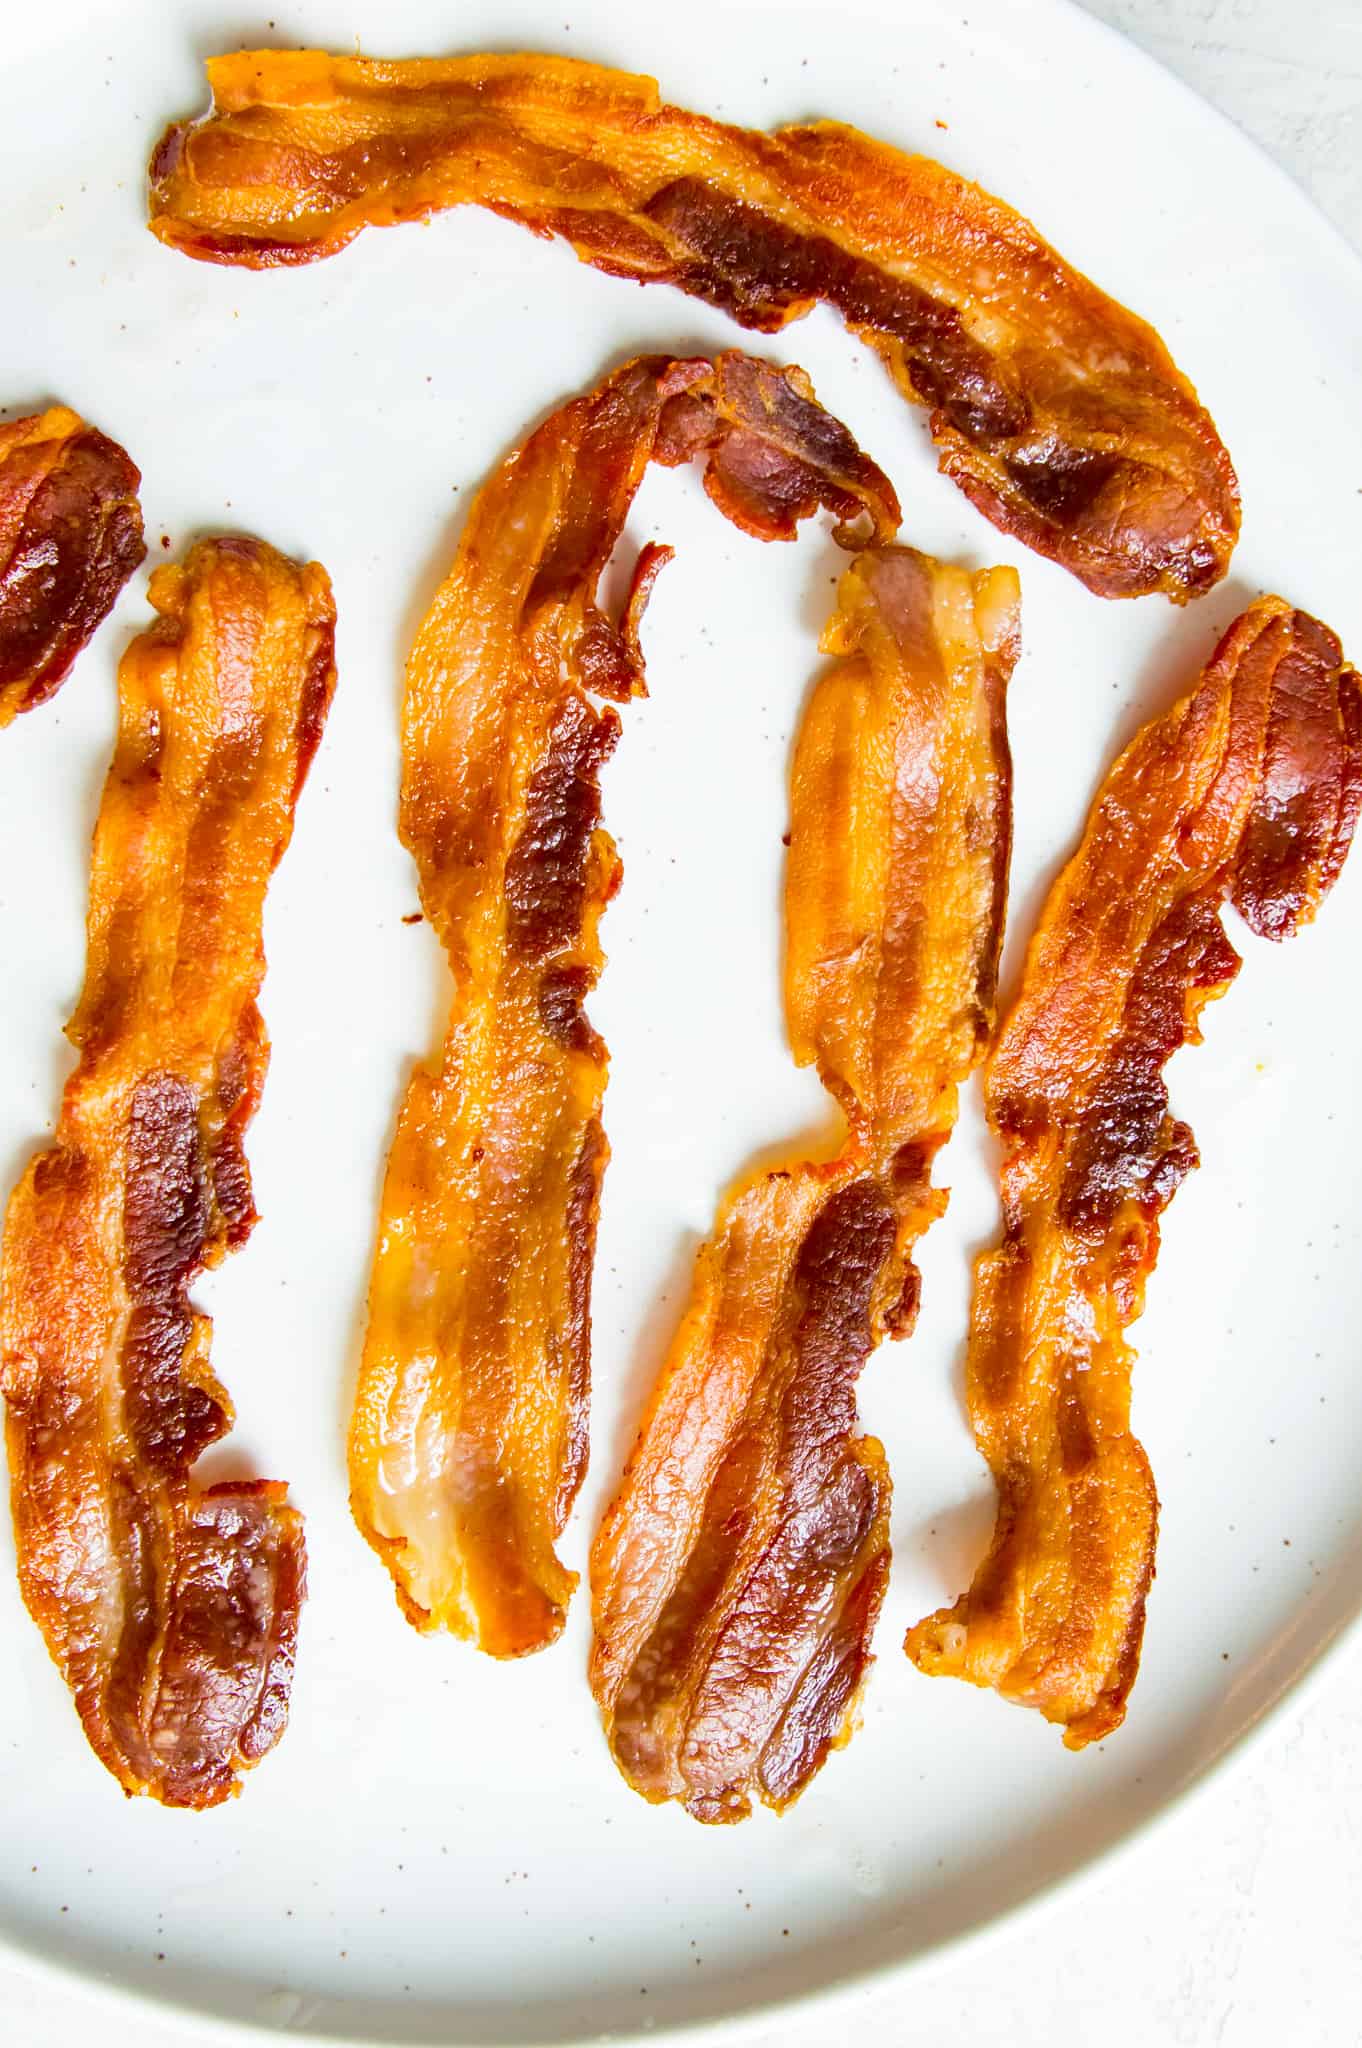 A plate full of cooked bacon strips.